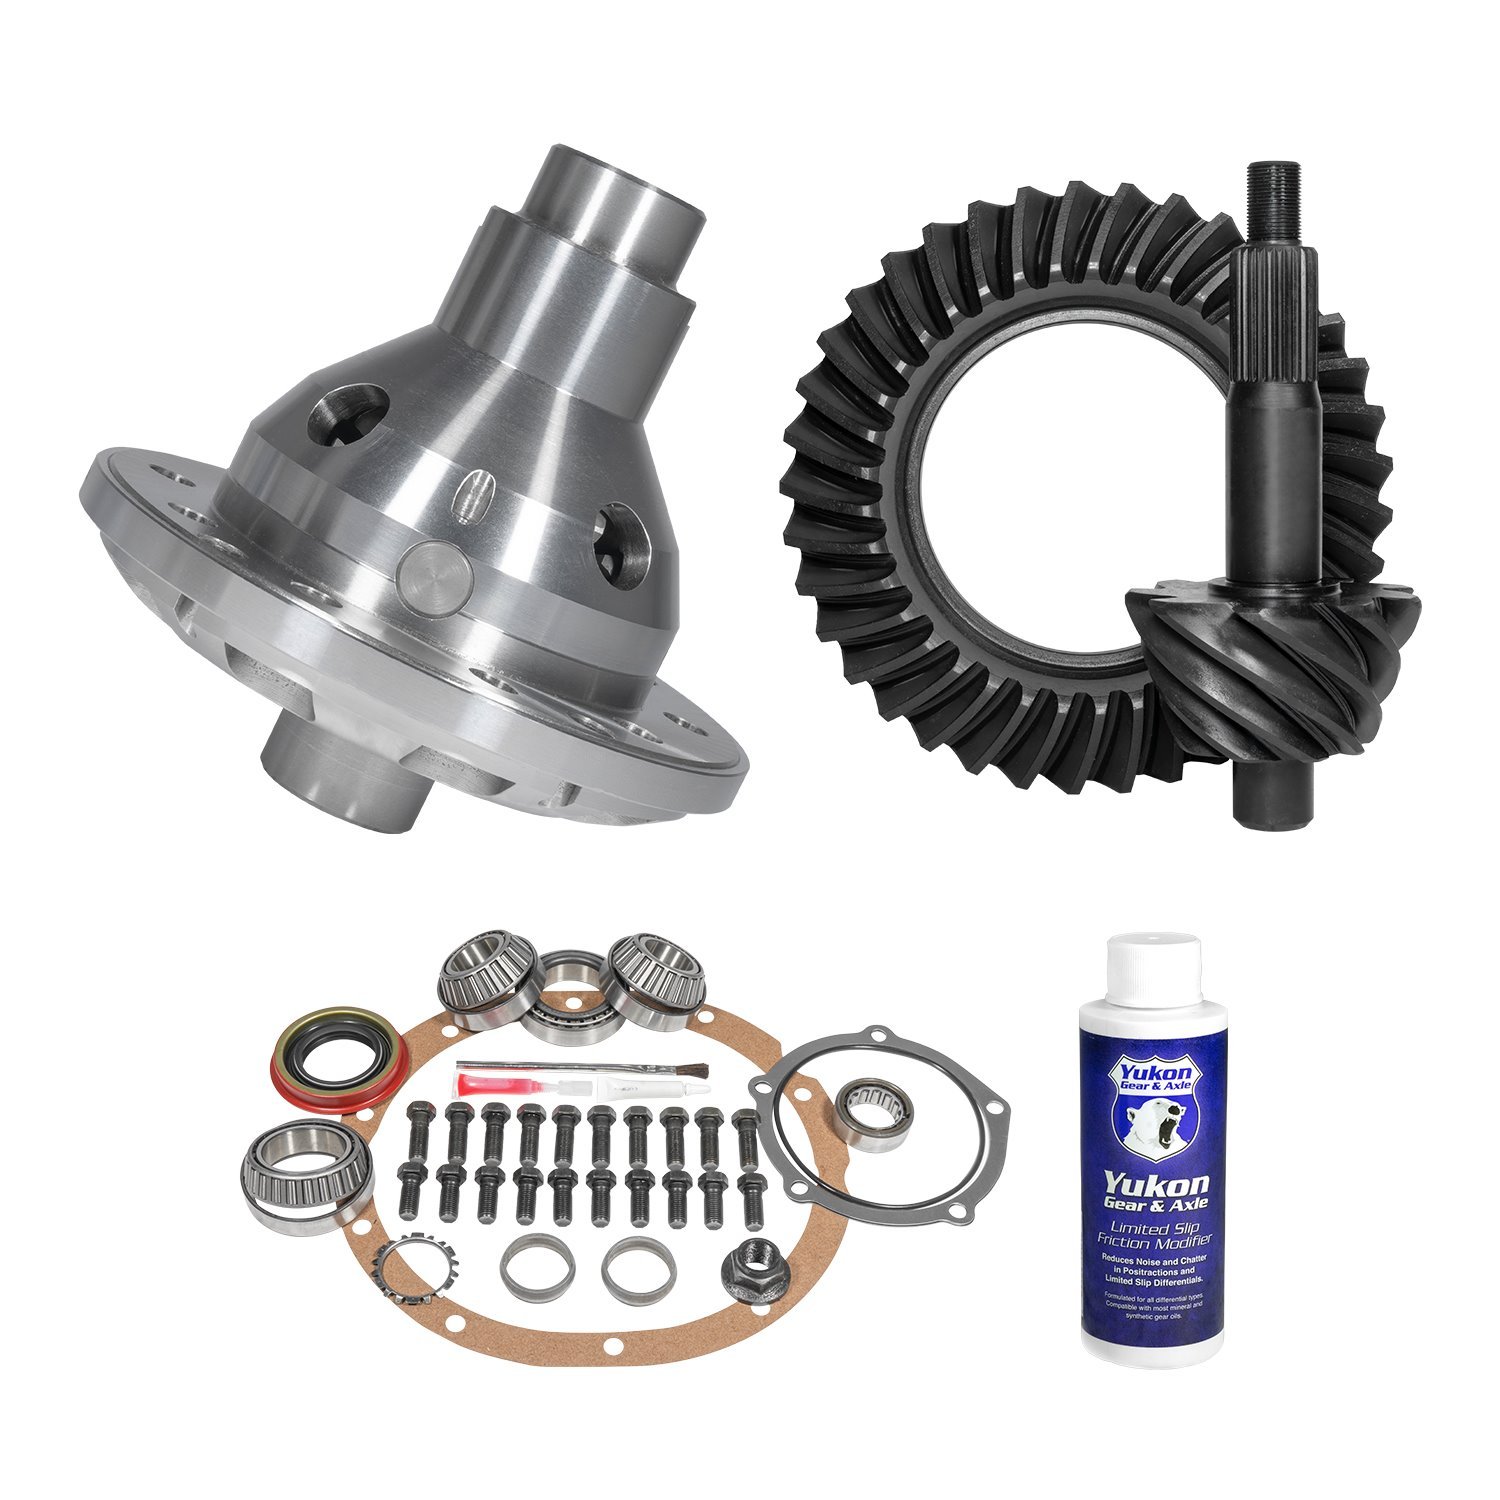 Muscle Car Limited Slip & Re-Gear Kit For Ford 9 in., 28 Spline, 3.50 Ratio